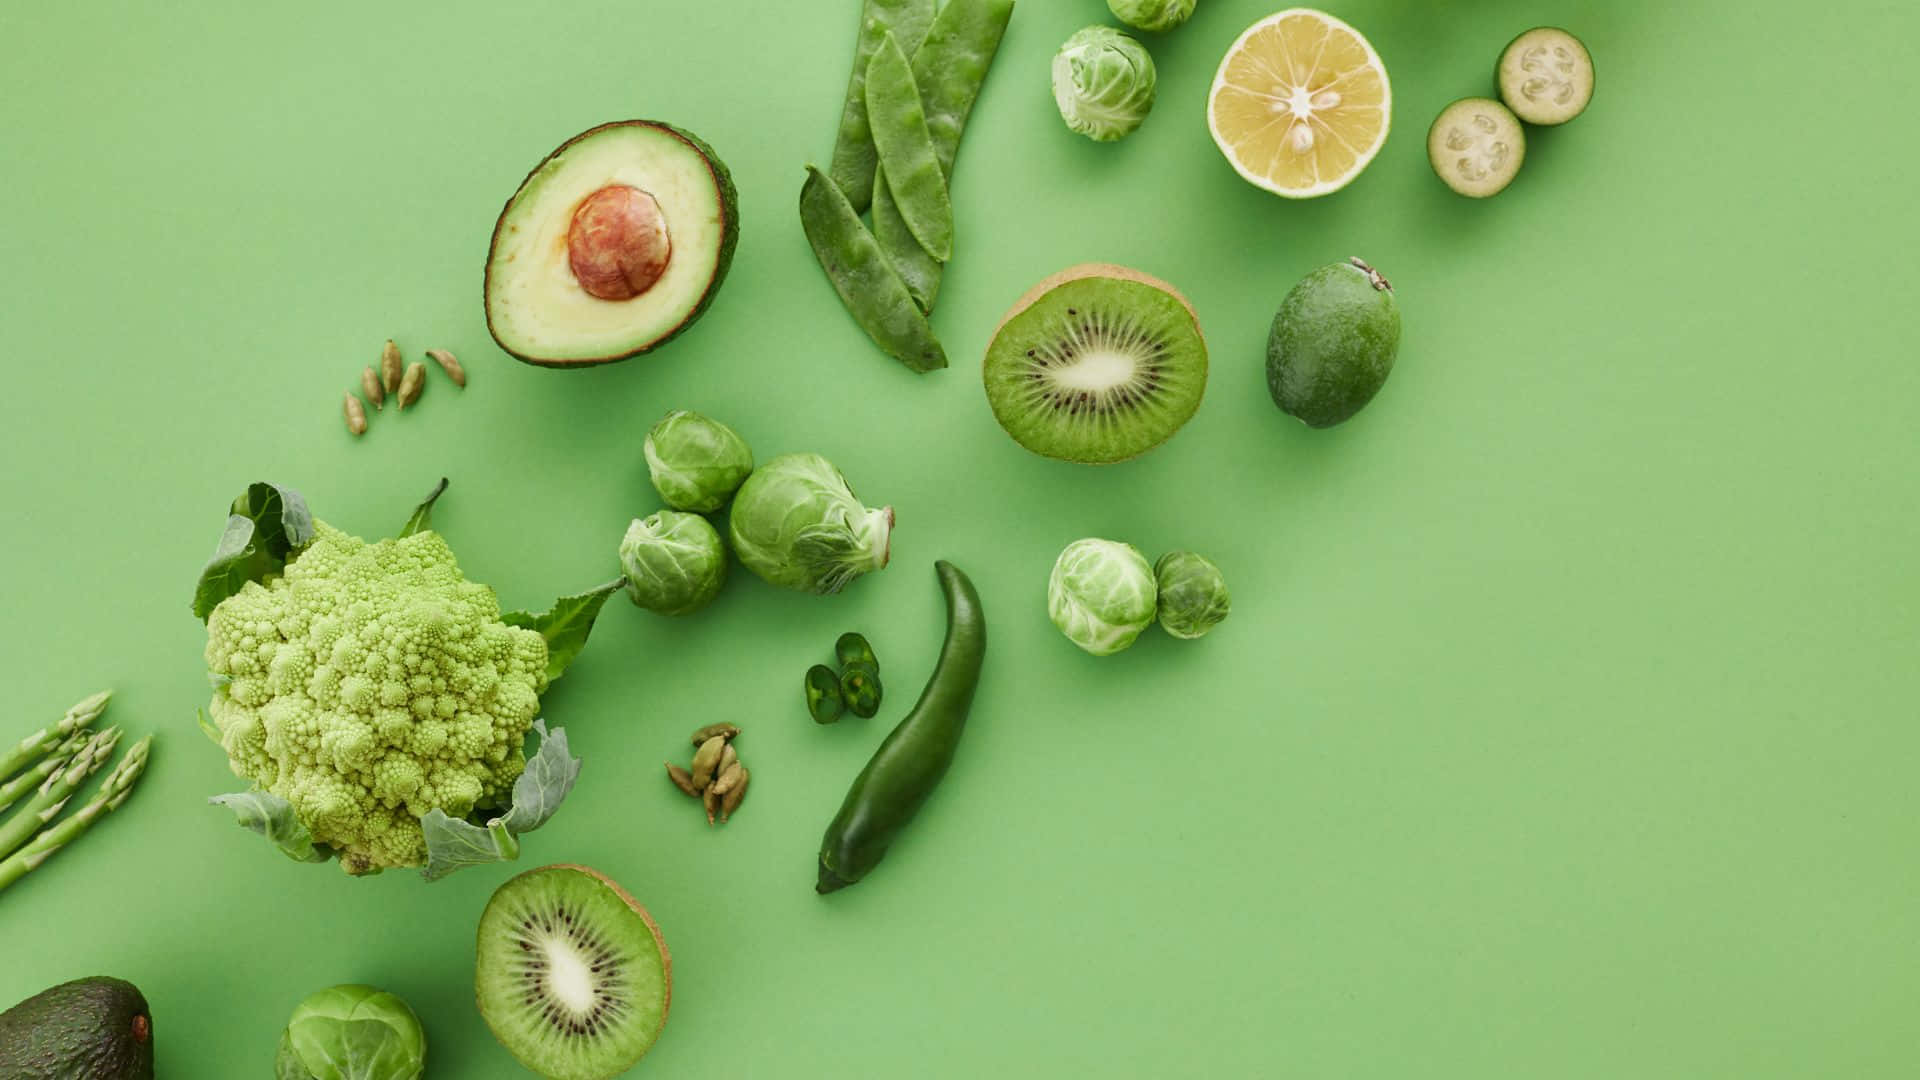 A Green Background With Various Vegetables And Fruits